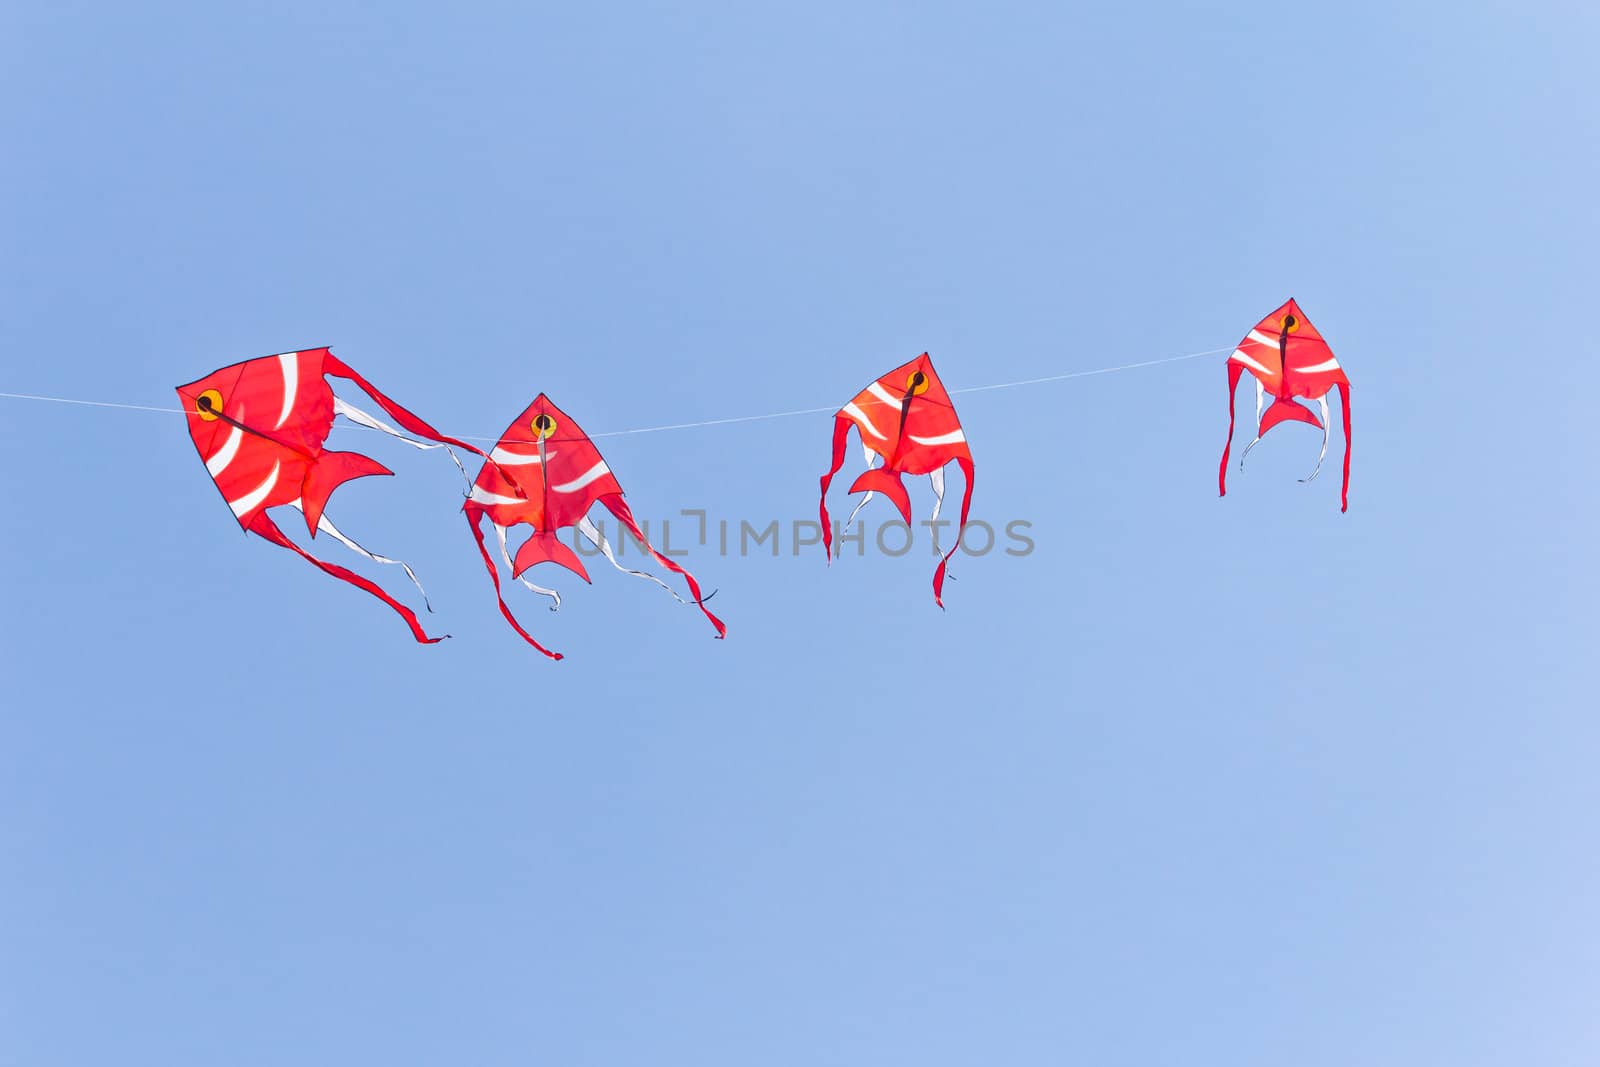 Fish kite against blue sky by tungphoto